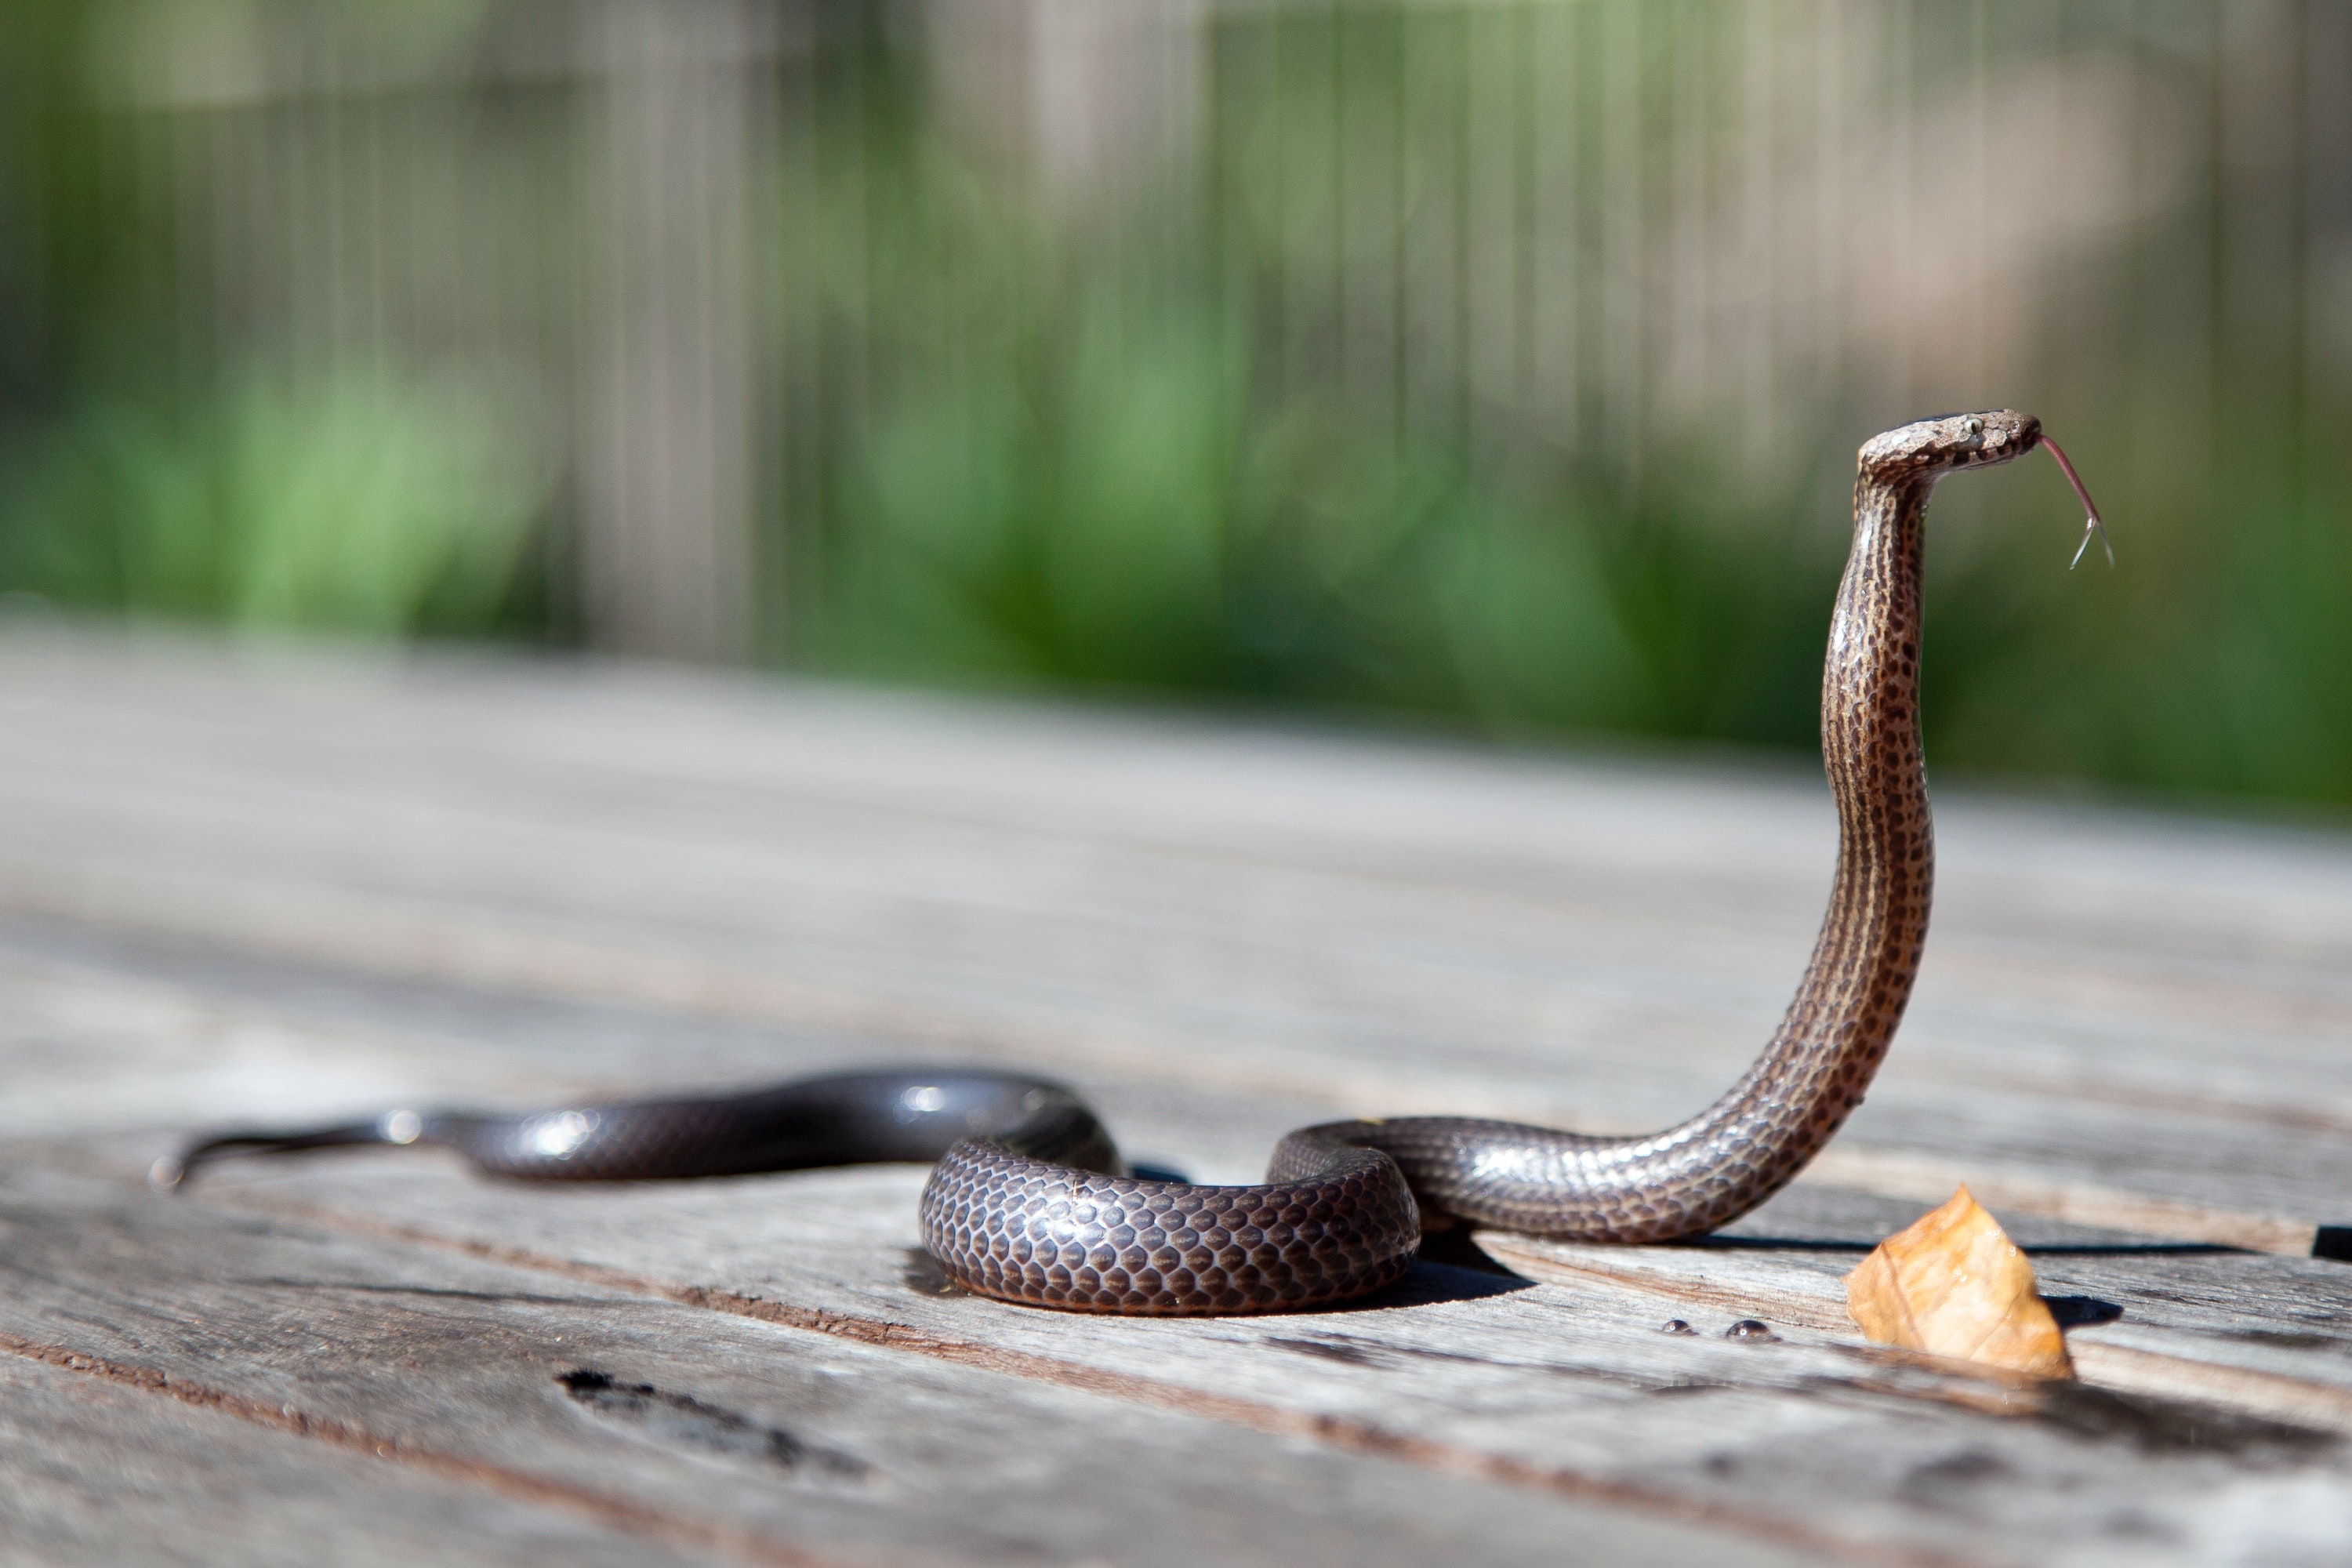 Can a snake crawl in your mouth as you sleep? Experts examine viral video